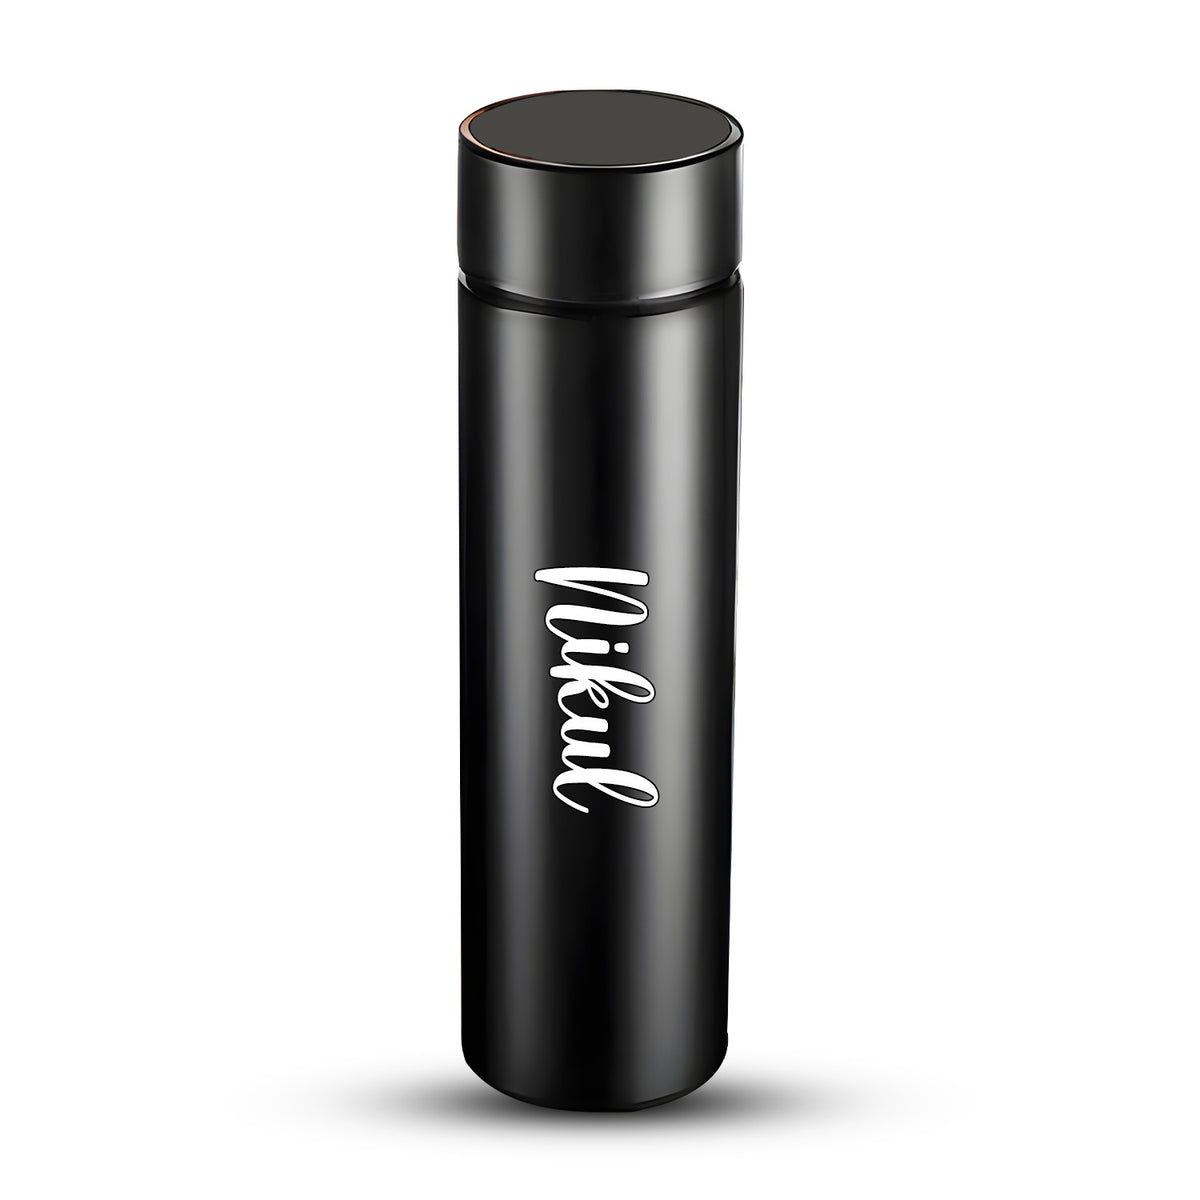 0726 Customized/Personalized Stainless Steel Smart Water Bottle with Smart LCD Temperature Touch Screen | Gifting Custom Name Water Bottle | Gifts for Boyfriend/Girlfriend/Employee | 500ML